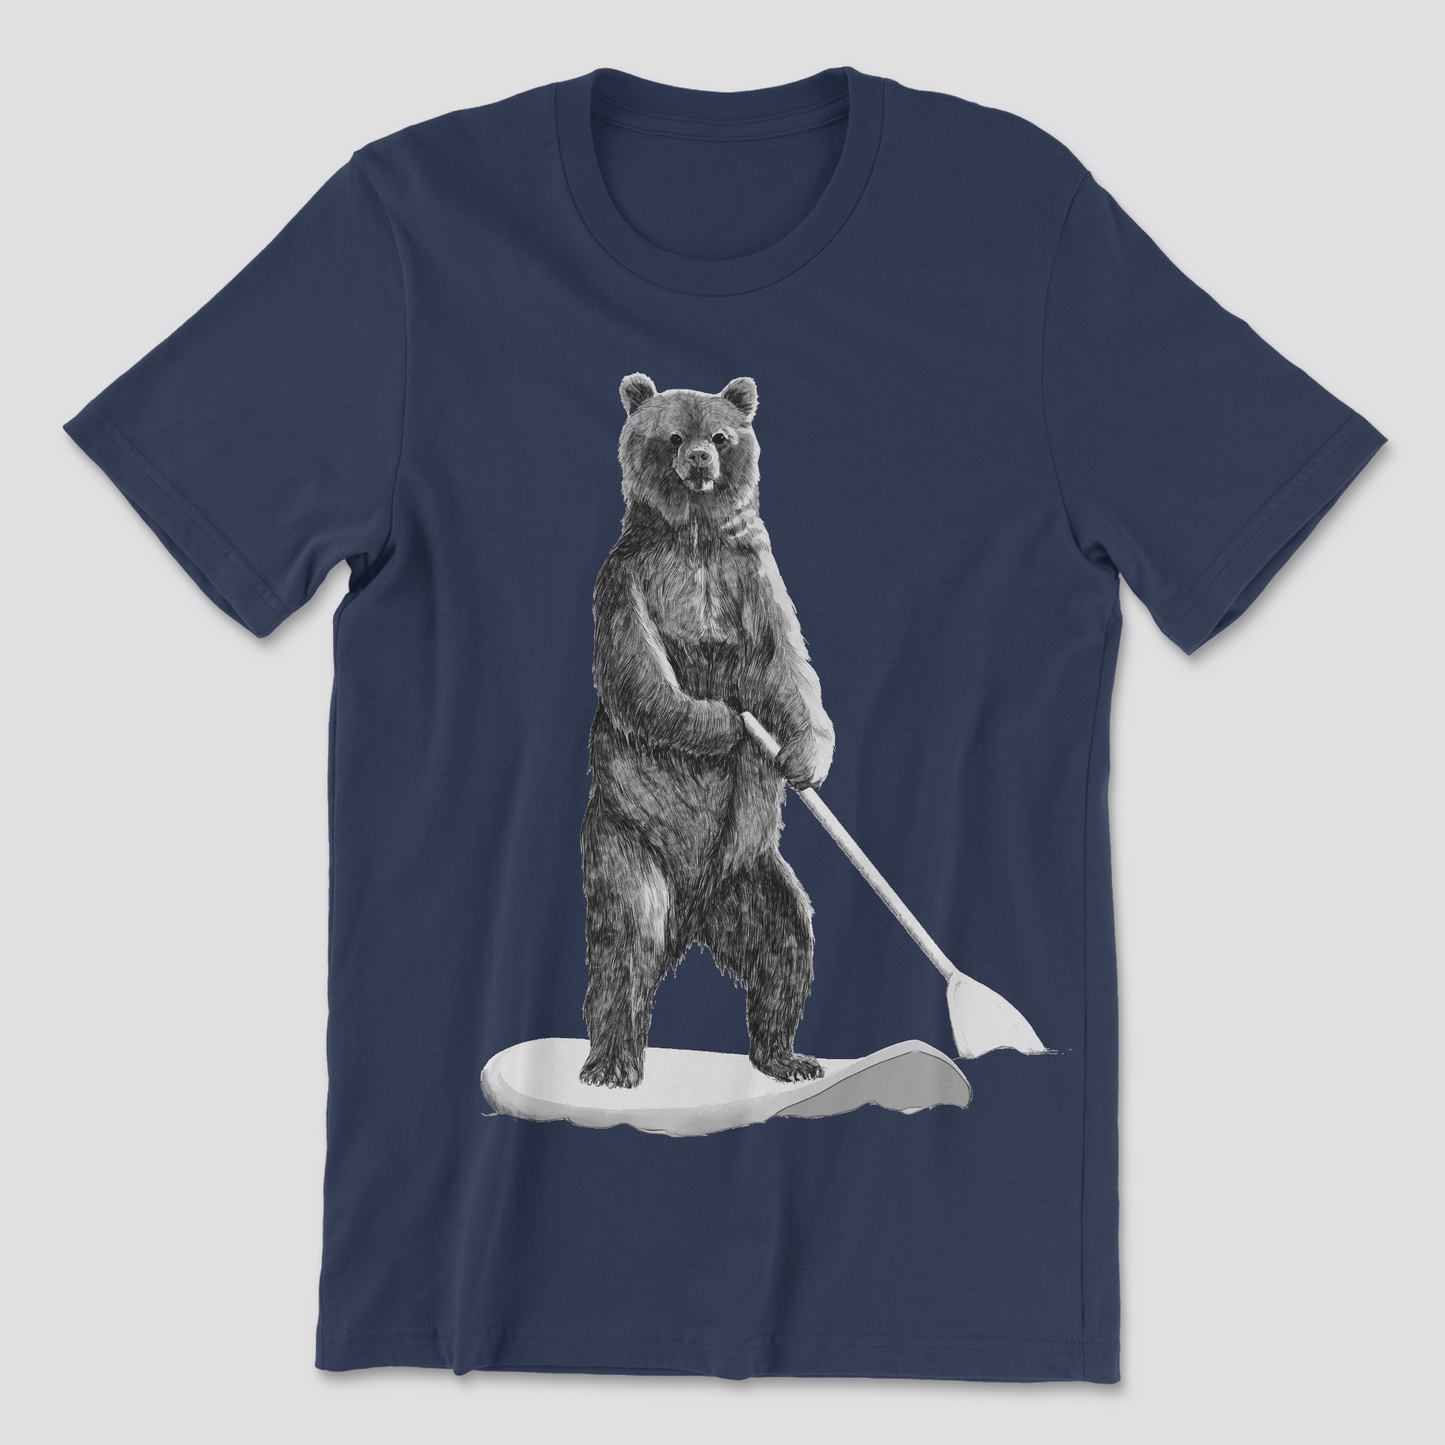 Grizzly SUP Adventure: Ride the Wild Waves T-Shirt